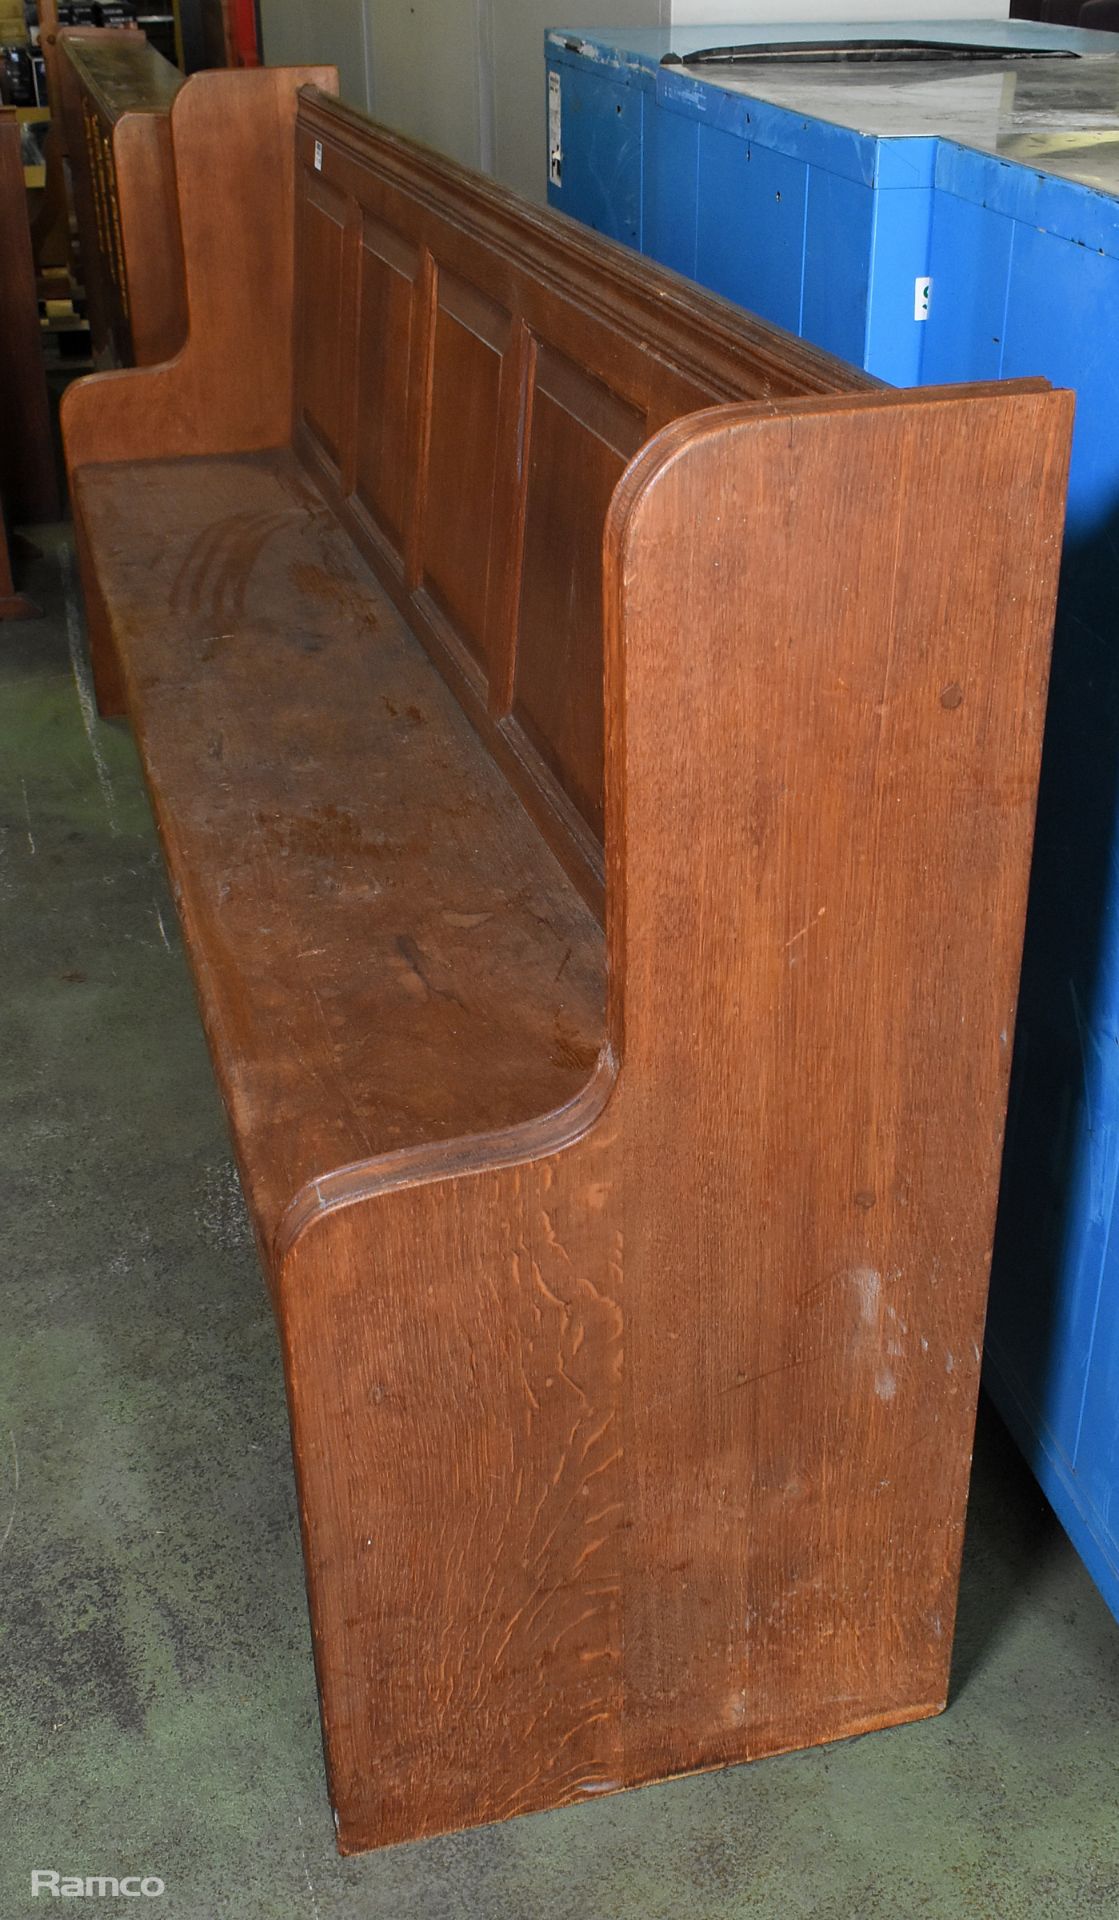 Wooden church pew - L 2500 x W 500 x H 1070mm - Image 5 of 6